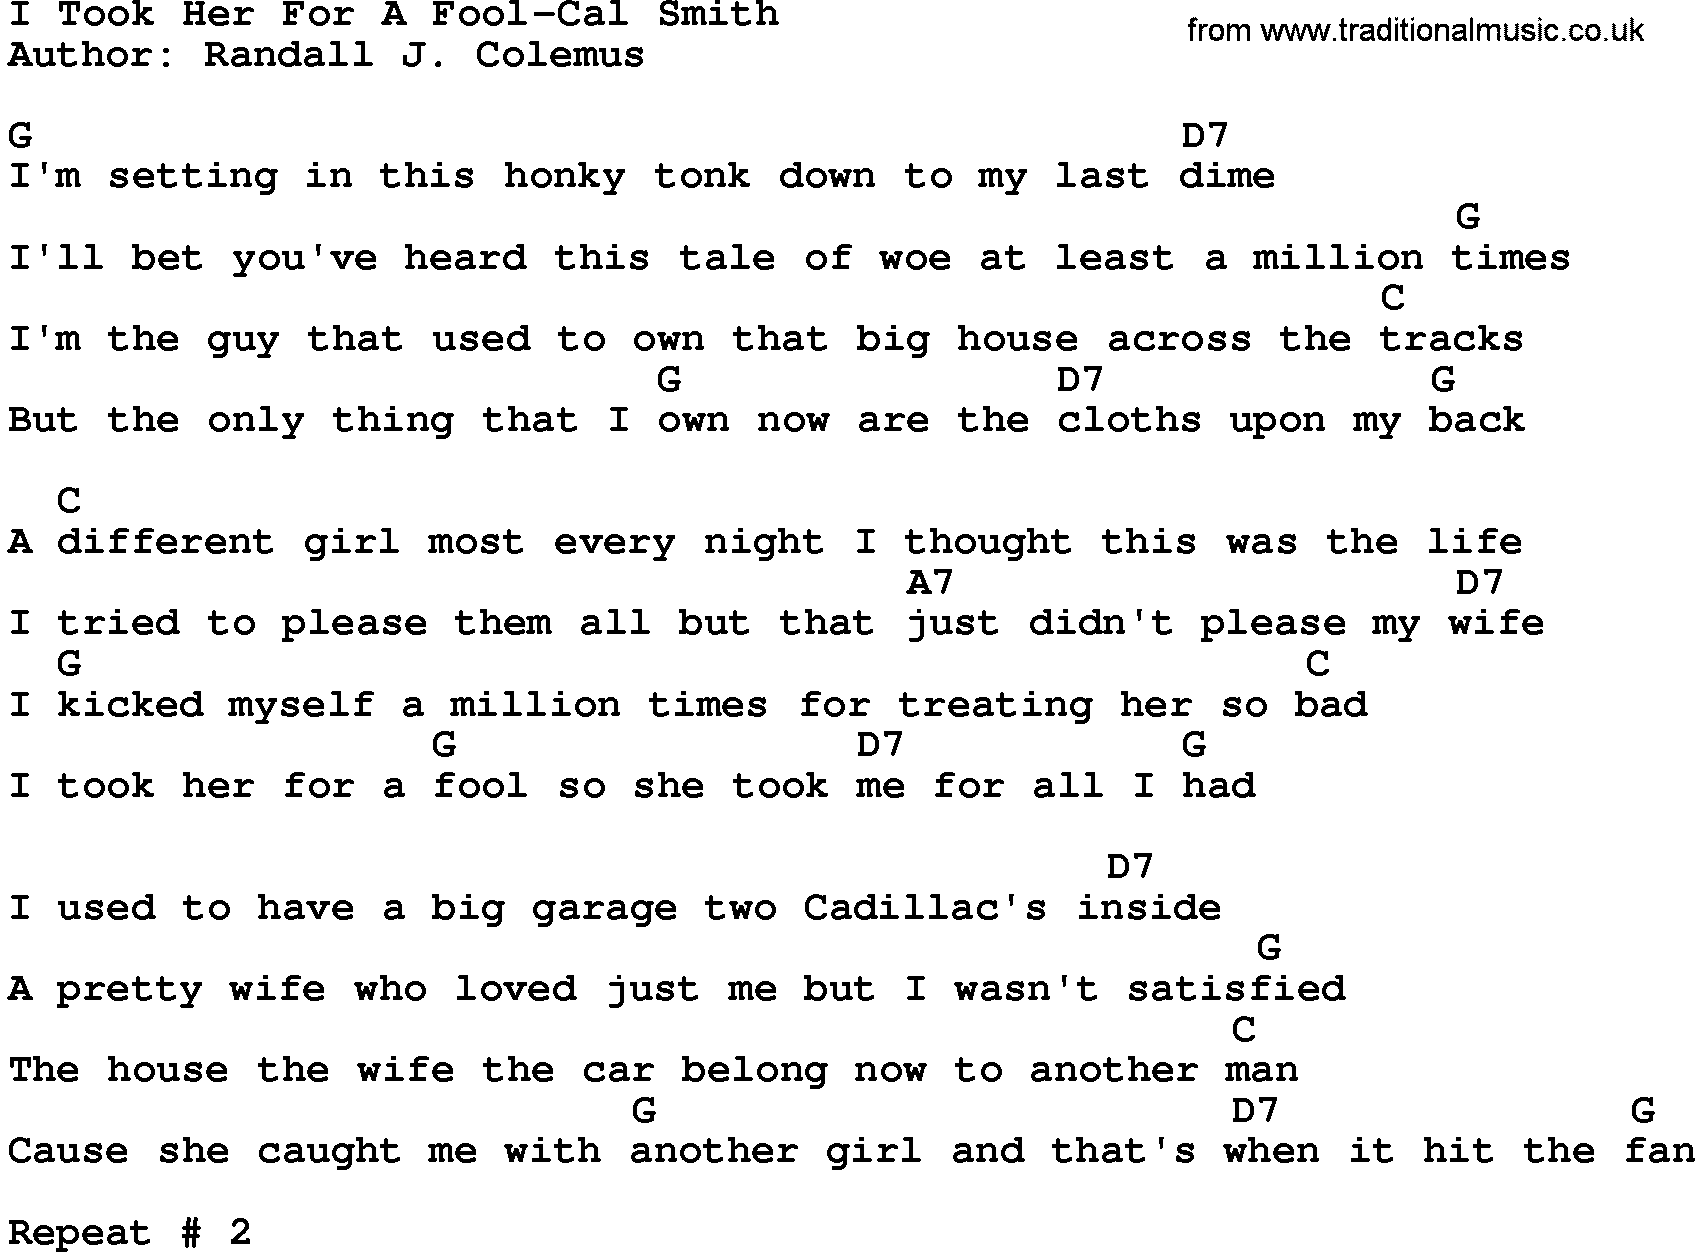 Country music song: I Took Her For A Fool-Cal Smith lyrics and chords